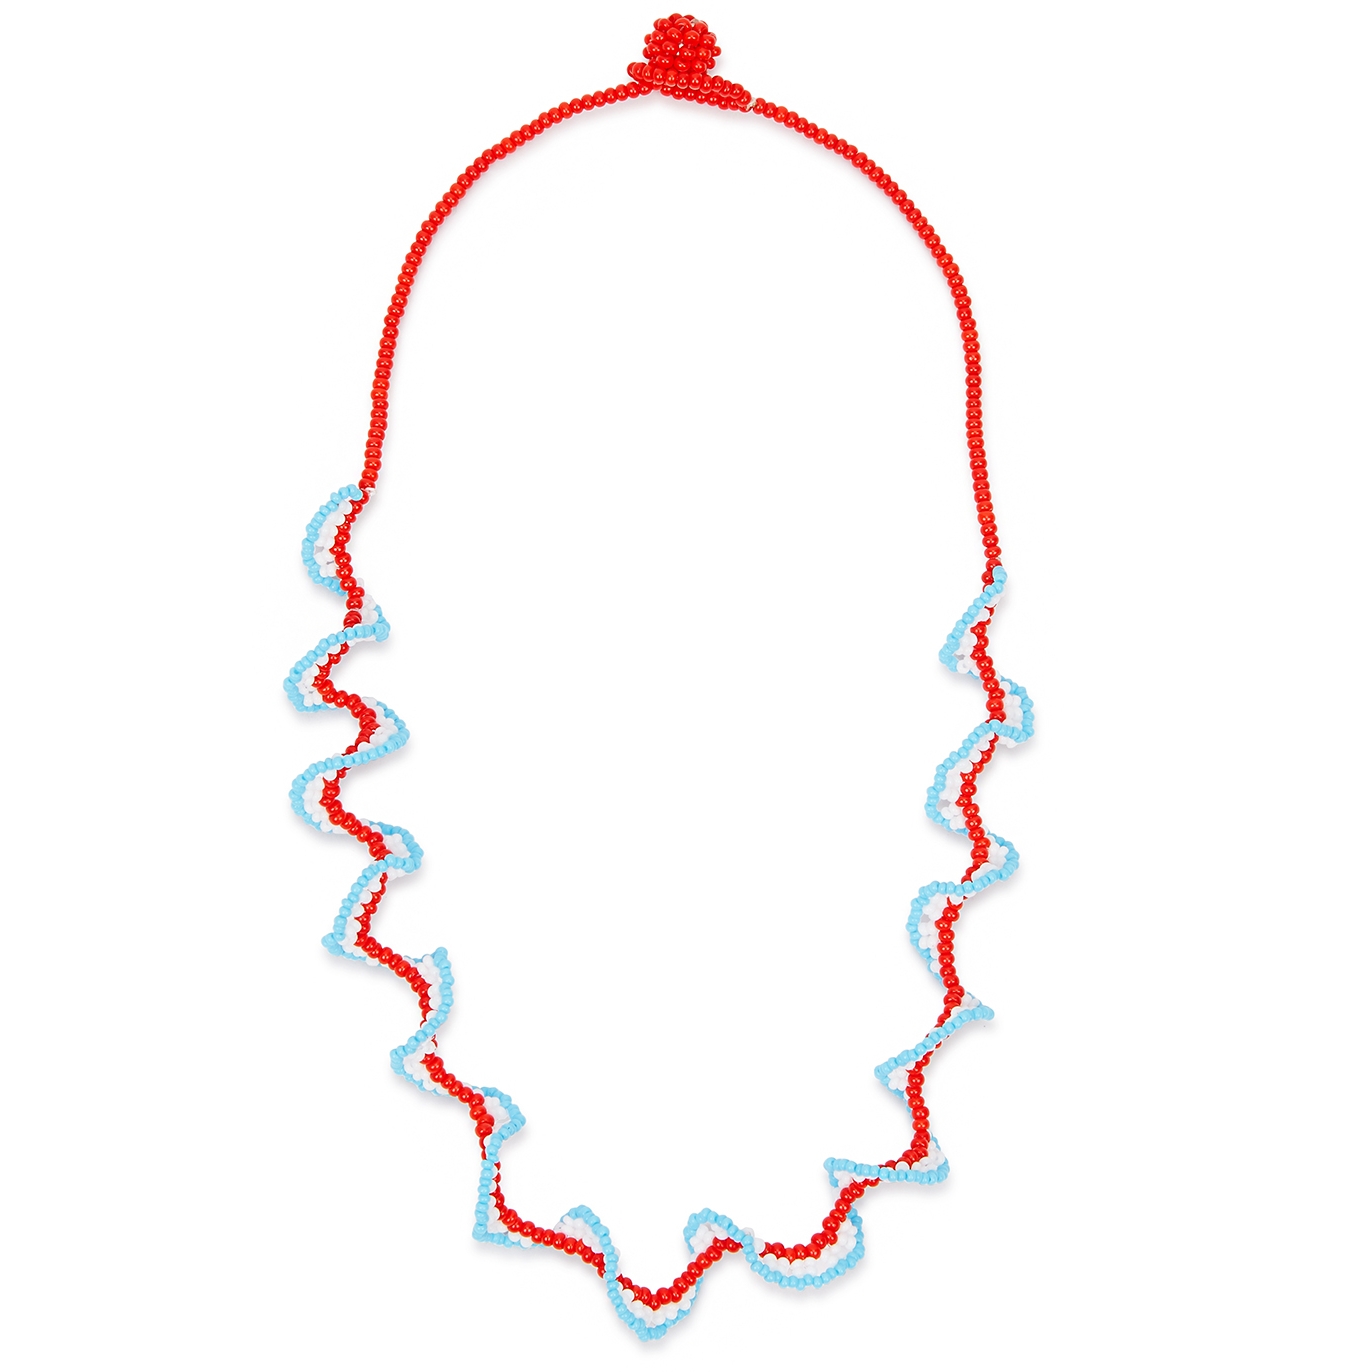 Gimaguas Twister Red Beaded Necklace - One Size